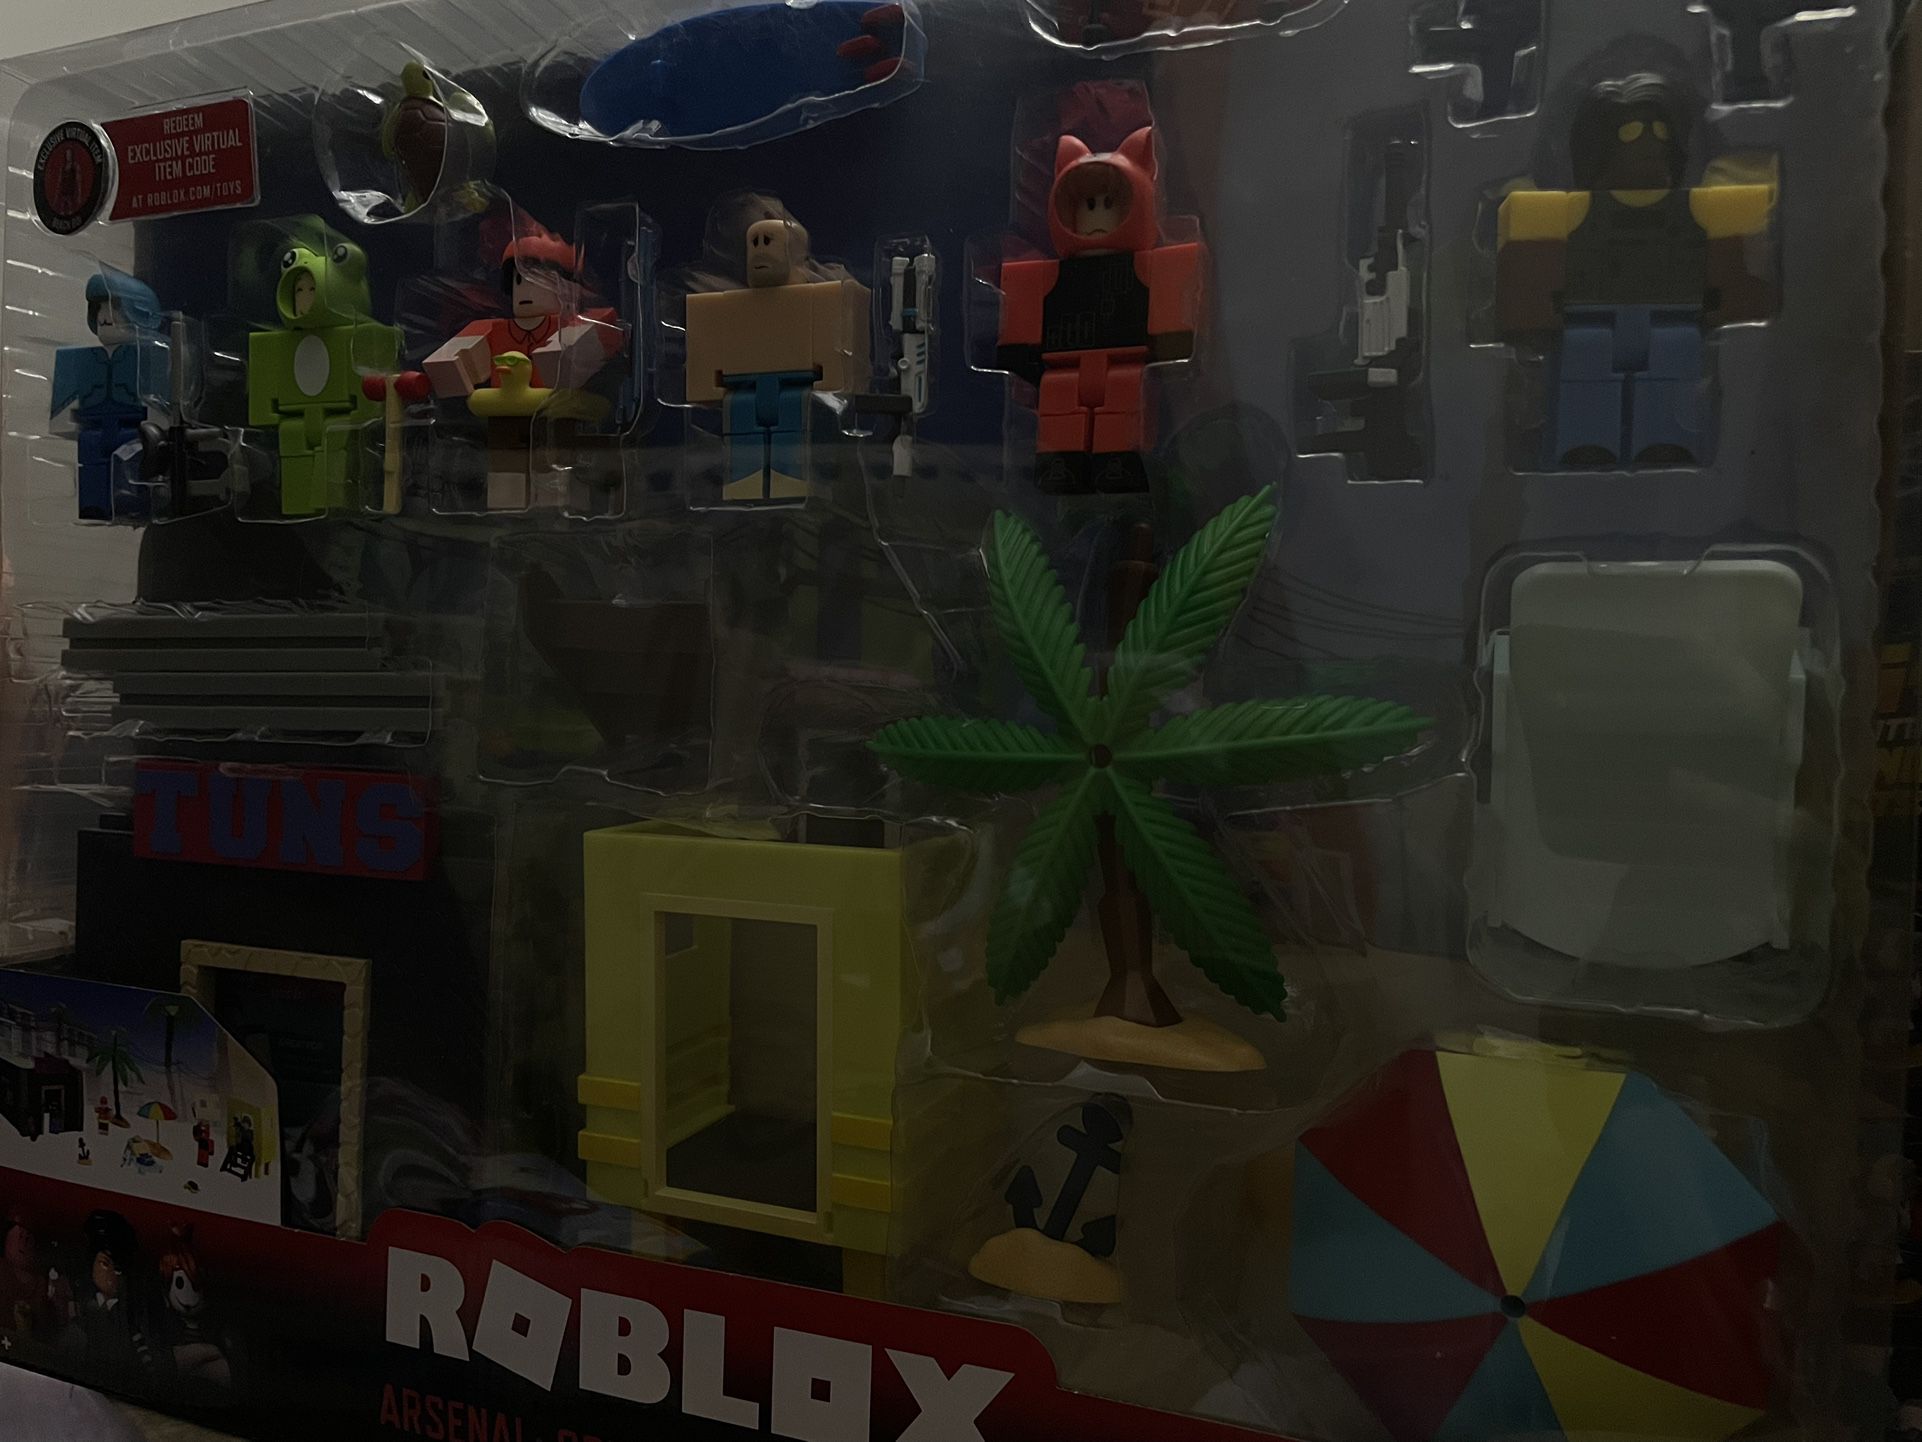  Roblox ROB0599 Action Collection-Arsenal: Operation Beach Day  Deluxe Playset [Includes Exclusive Virtual Item], Multi-Color : Toys & Games